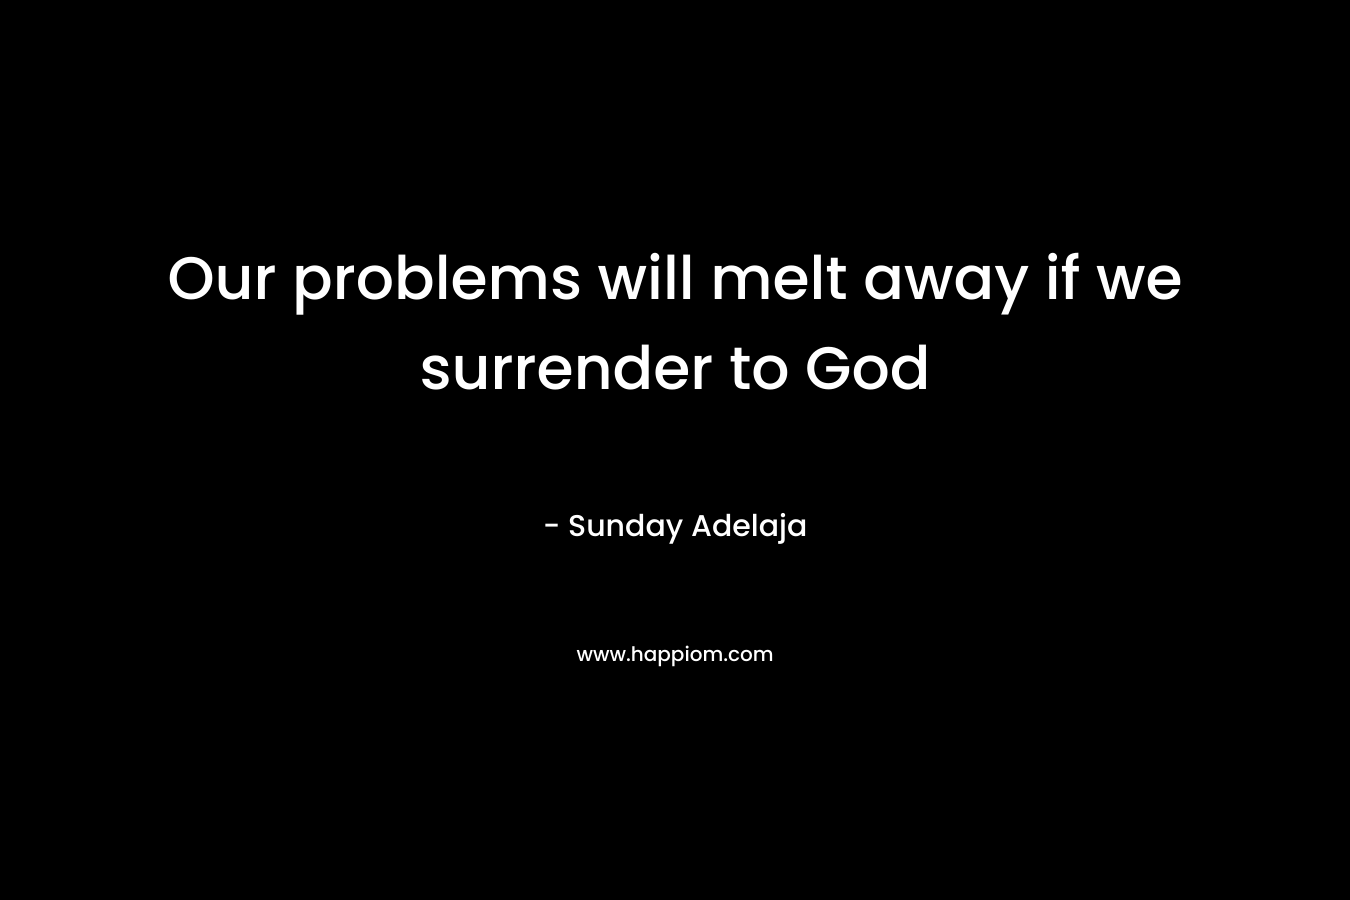 Our problems will melt away if we surrender to God